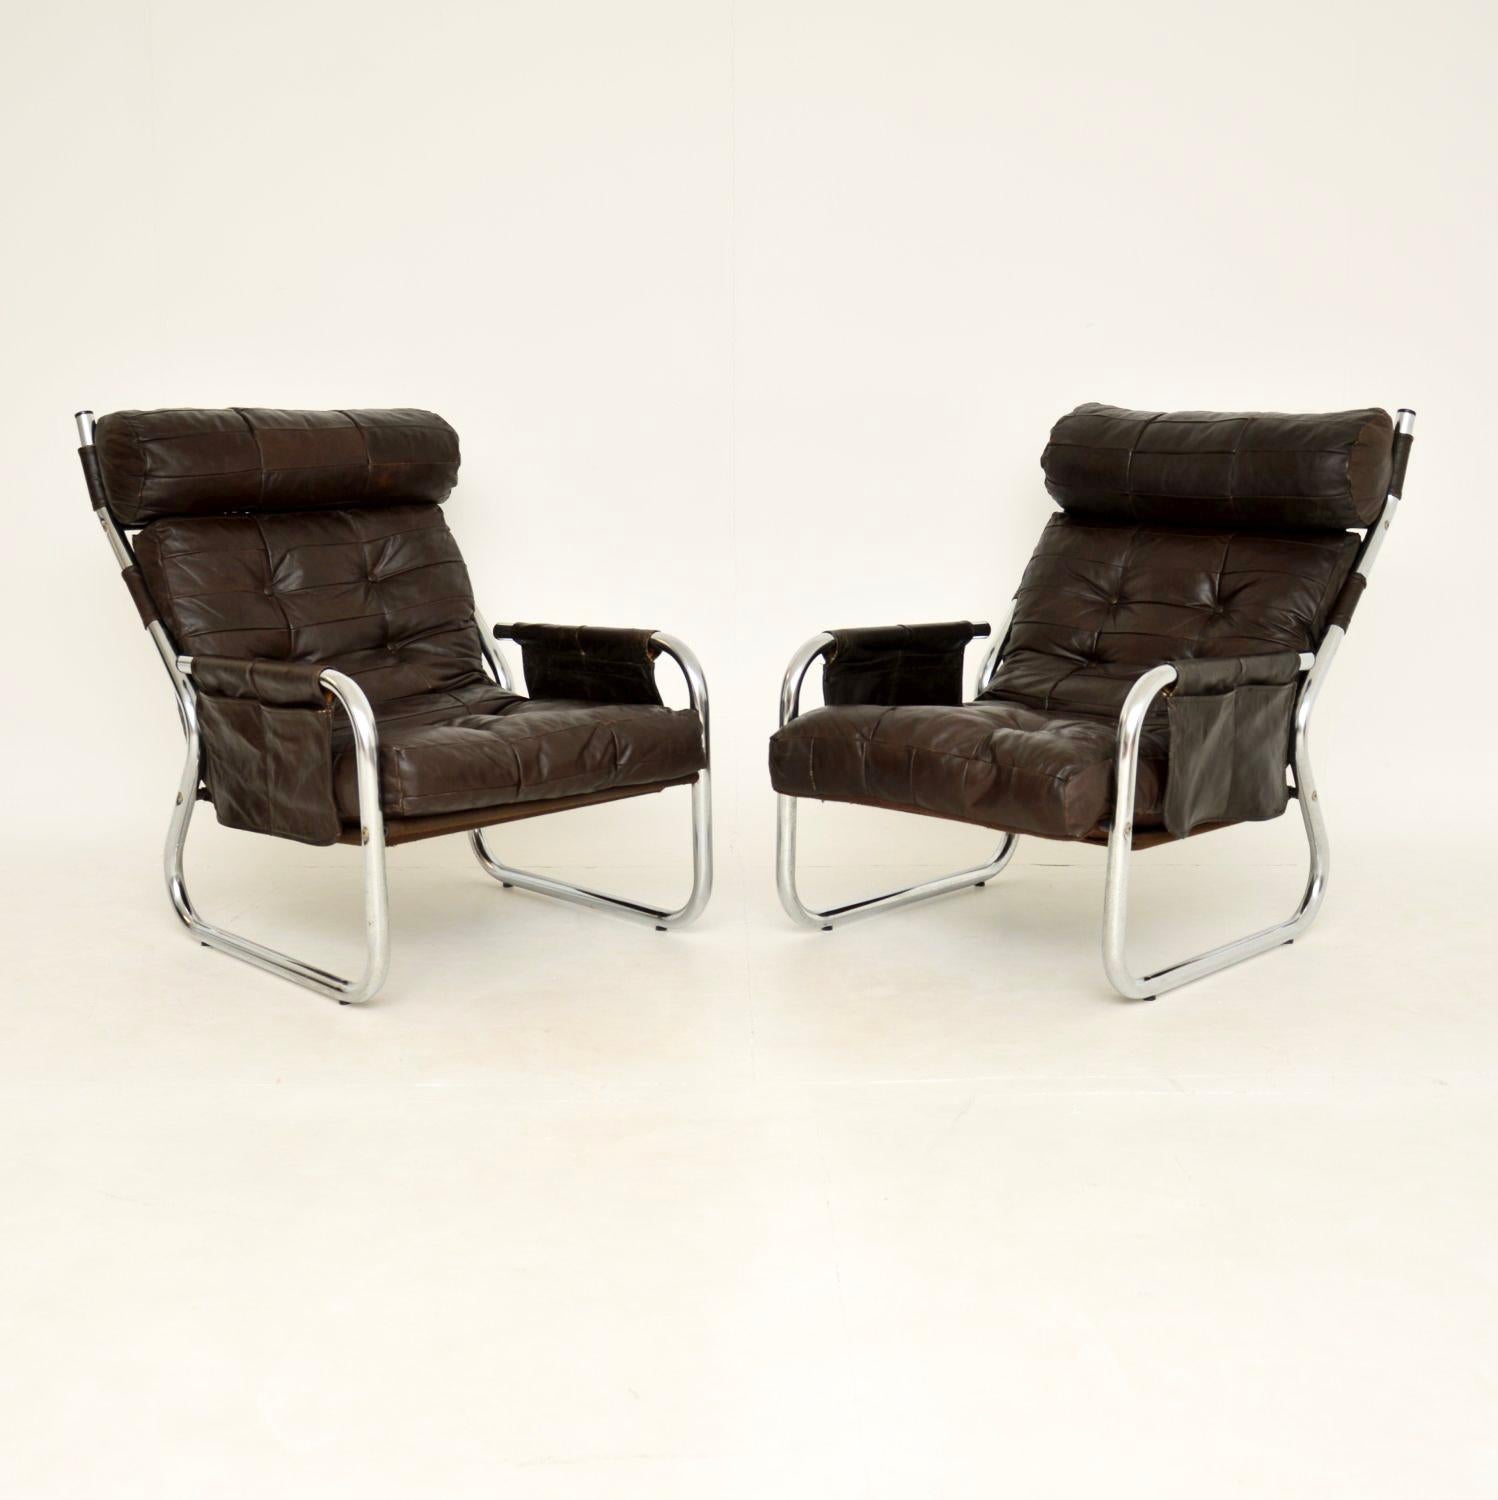 A stylish and extremely comfortable pair of vintage Danish armchairs in leather and chrome. These were recently imported from Denmark, they date from the 1960-1970’s.

The quality is excellent, with nicely shaped thick tubular steel frames and